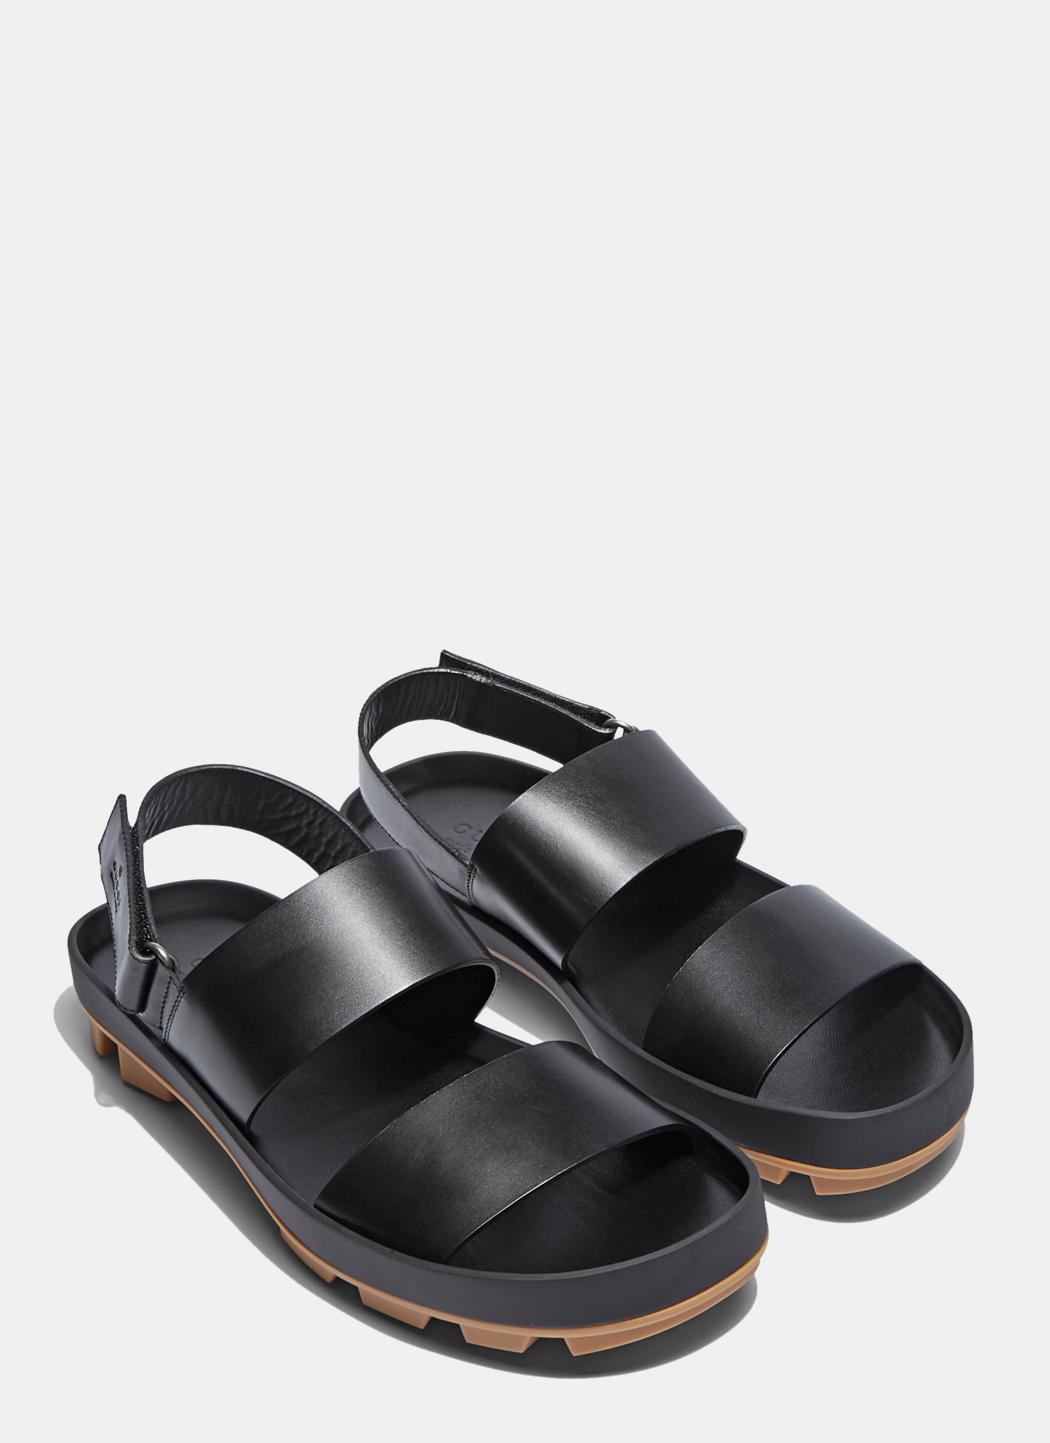 Lyst - Gucci Men's Leather Two Strap Sandals In Black in Black for Men